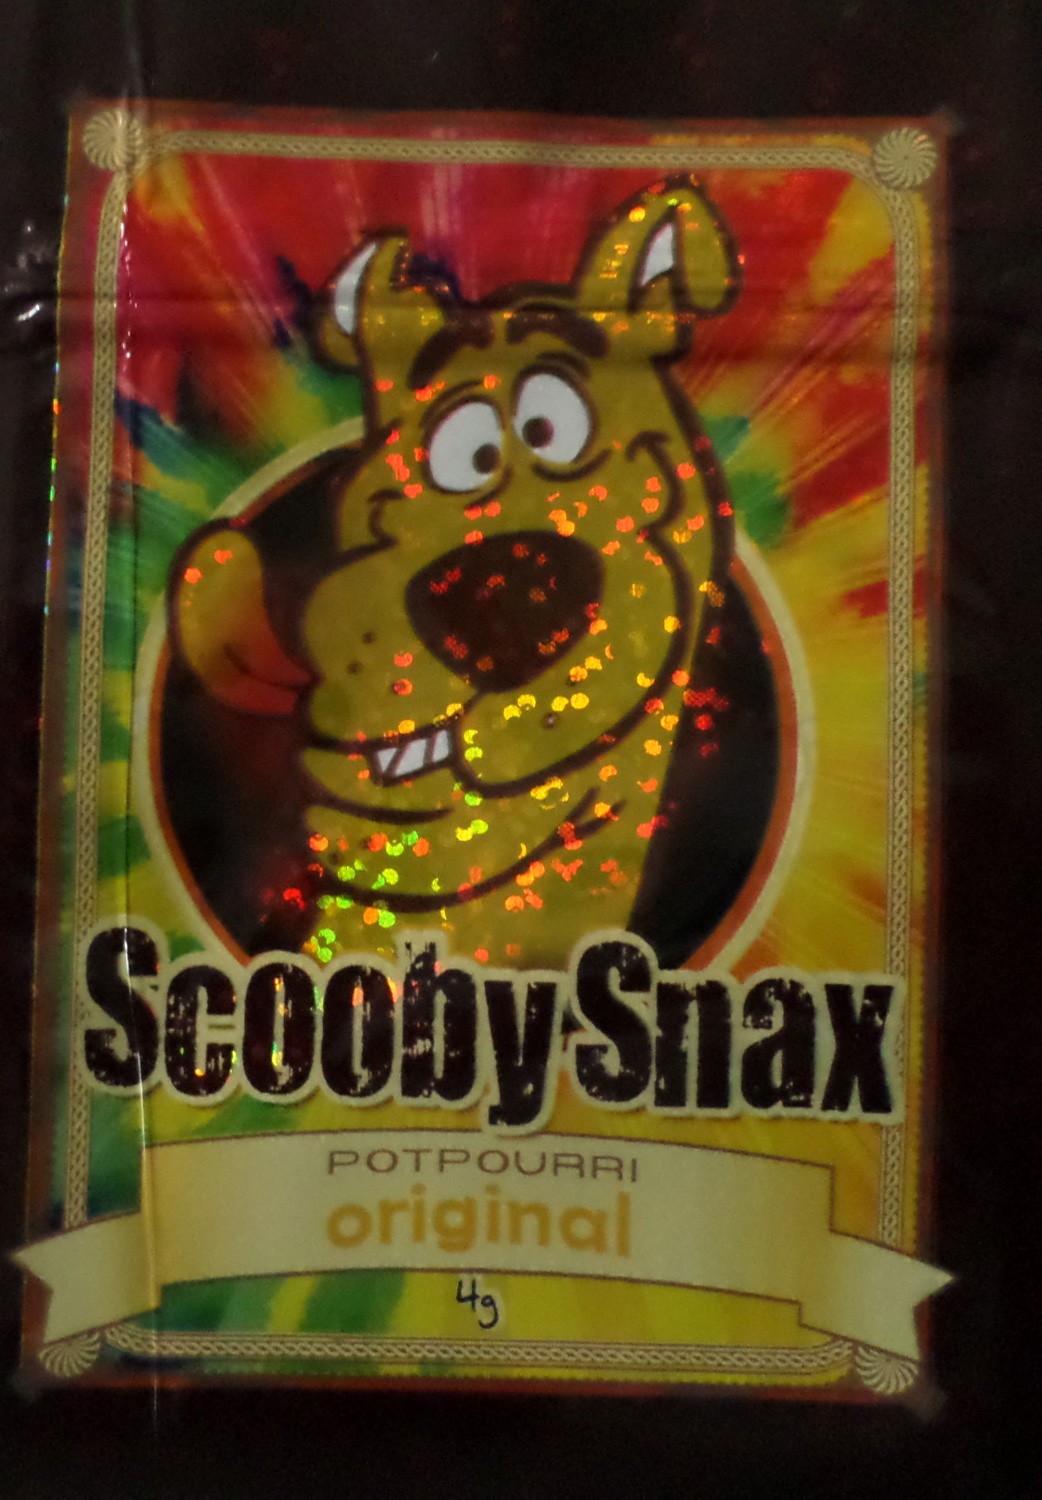 Scooby Snax 2 4g incense 10x pack